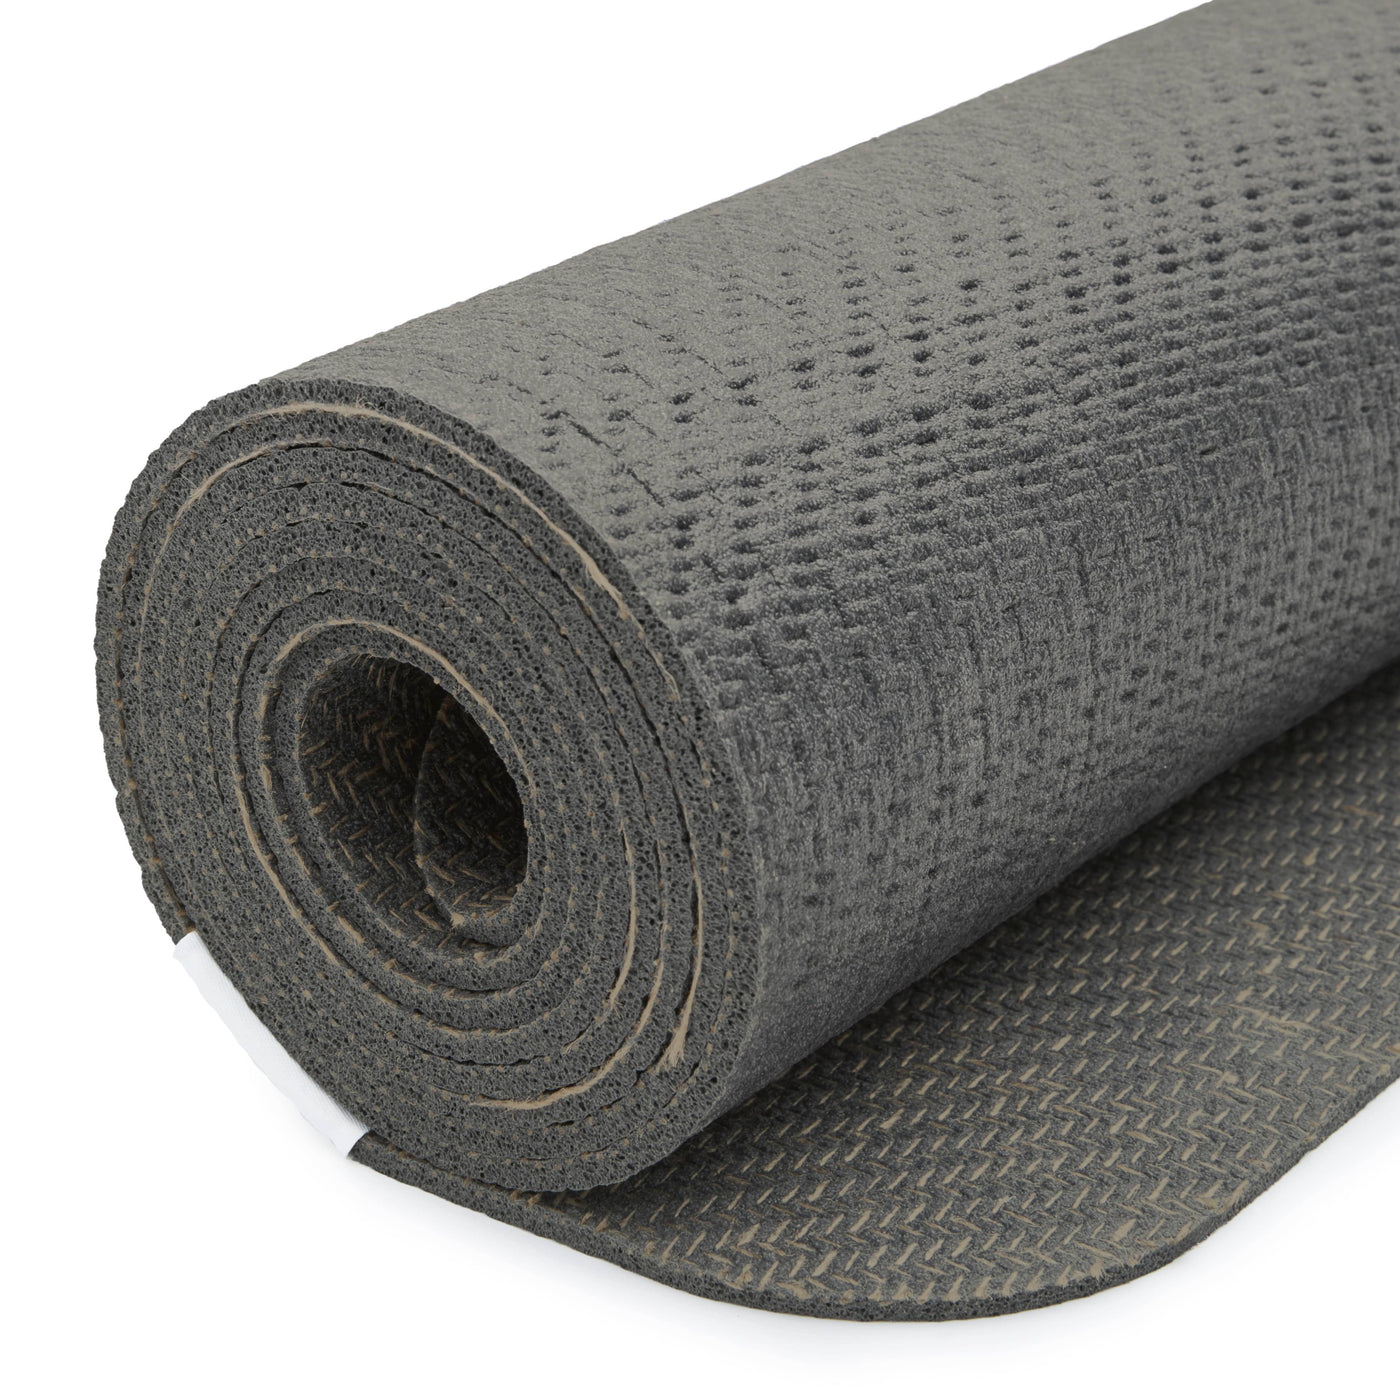  Clever Yoga Mat BetterGrip Eco-Friendly Recyclable Non-Slip  and Durable TPE 6mm or 1/4 Thick - (Black) : Sports & Outdoors